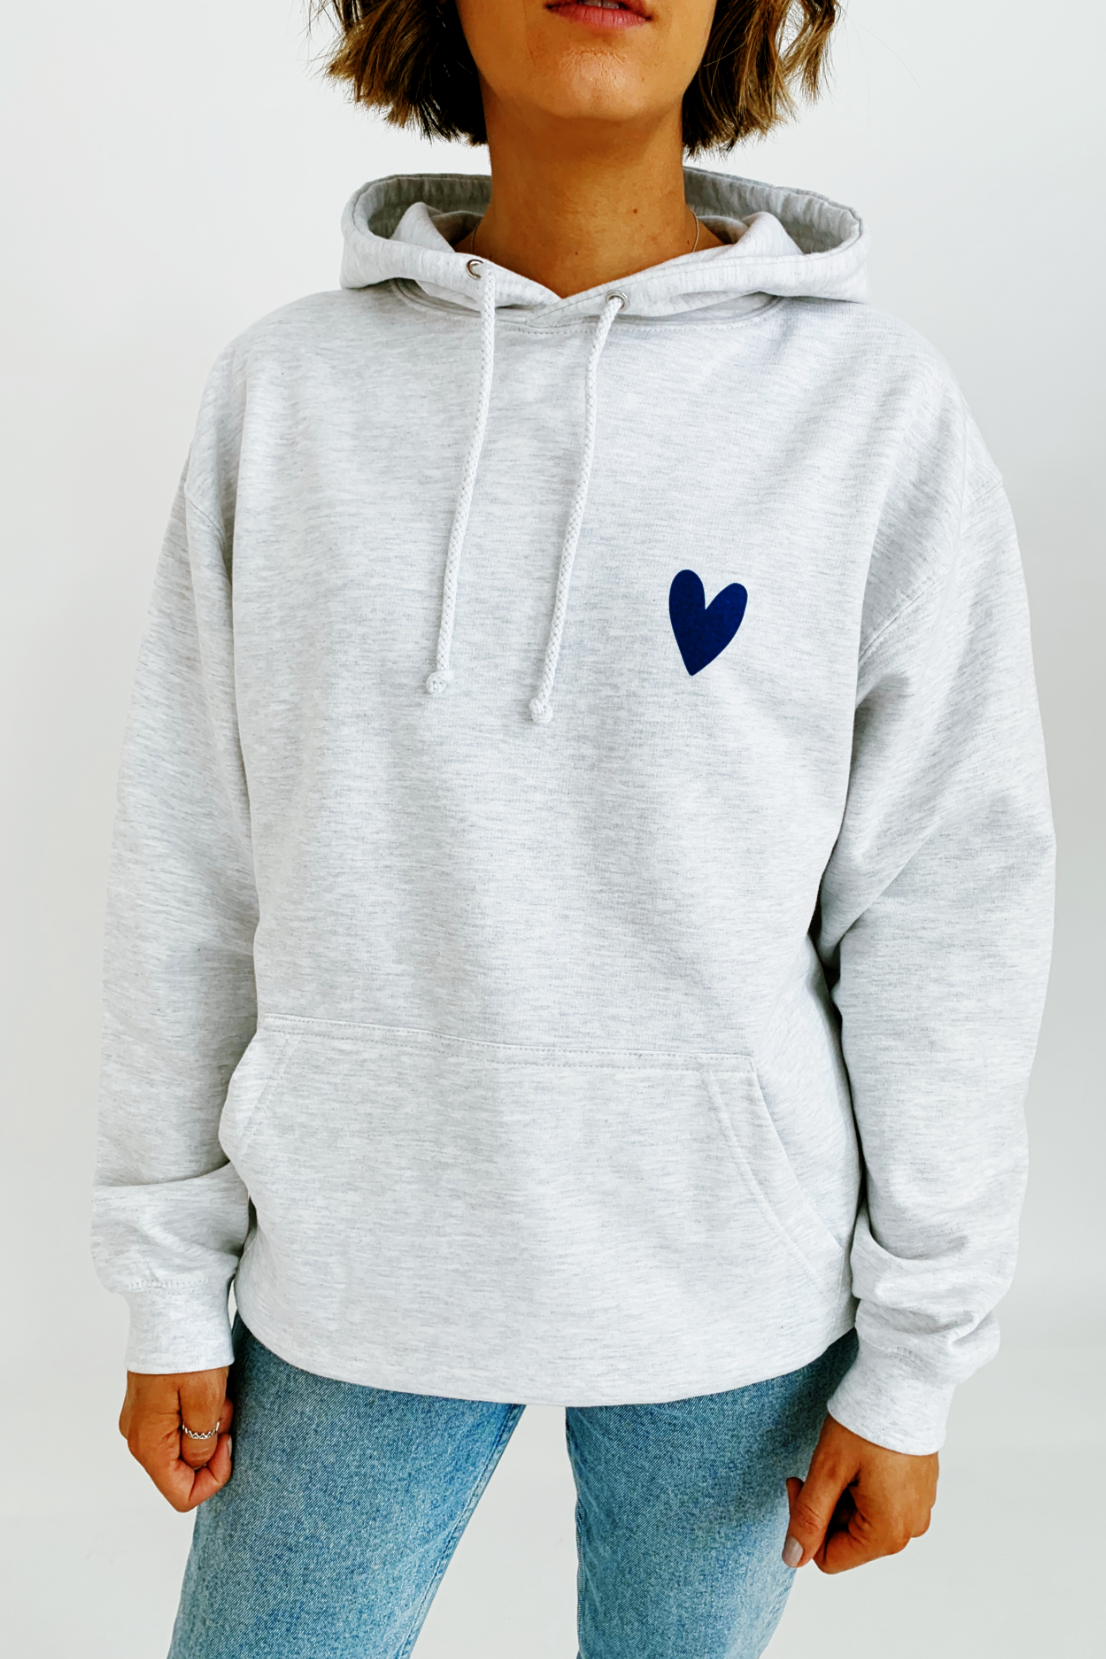 O&F Open Your Heart Hoodie